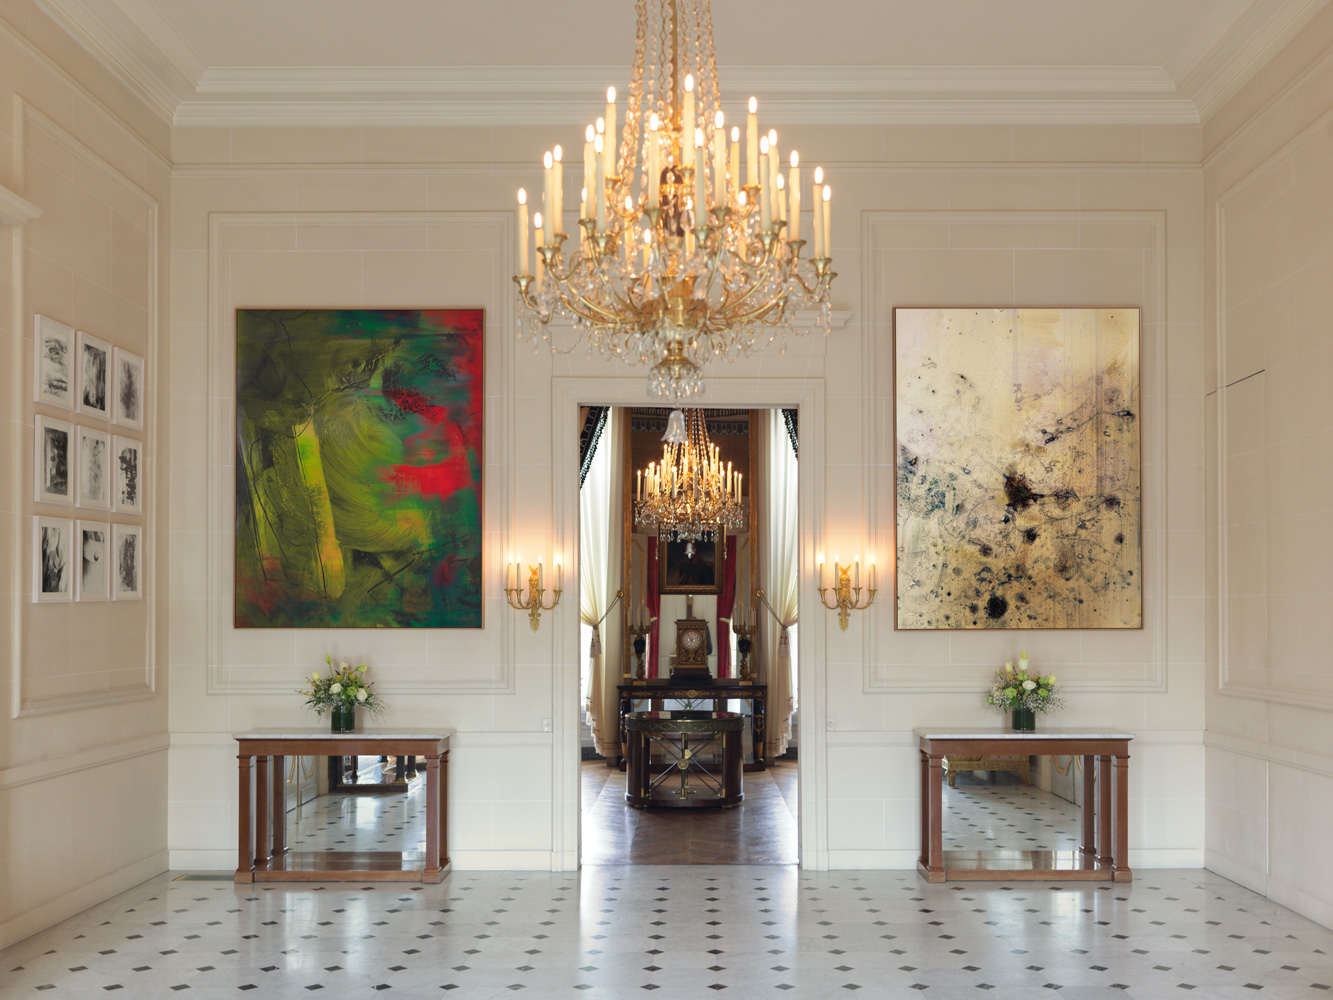 Installation view of a room with a big chandelier, and two large paintings above two small tables. Exhibition “Elias Wessel : La somme de mes données;” Palais Beauharnais Paris, 2020